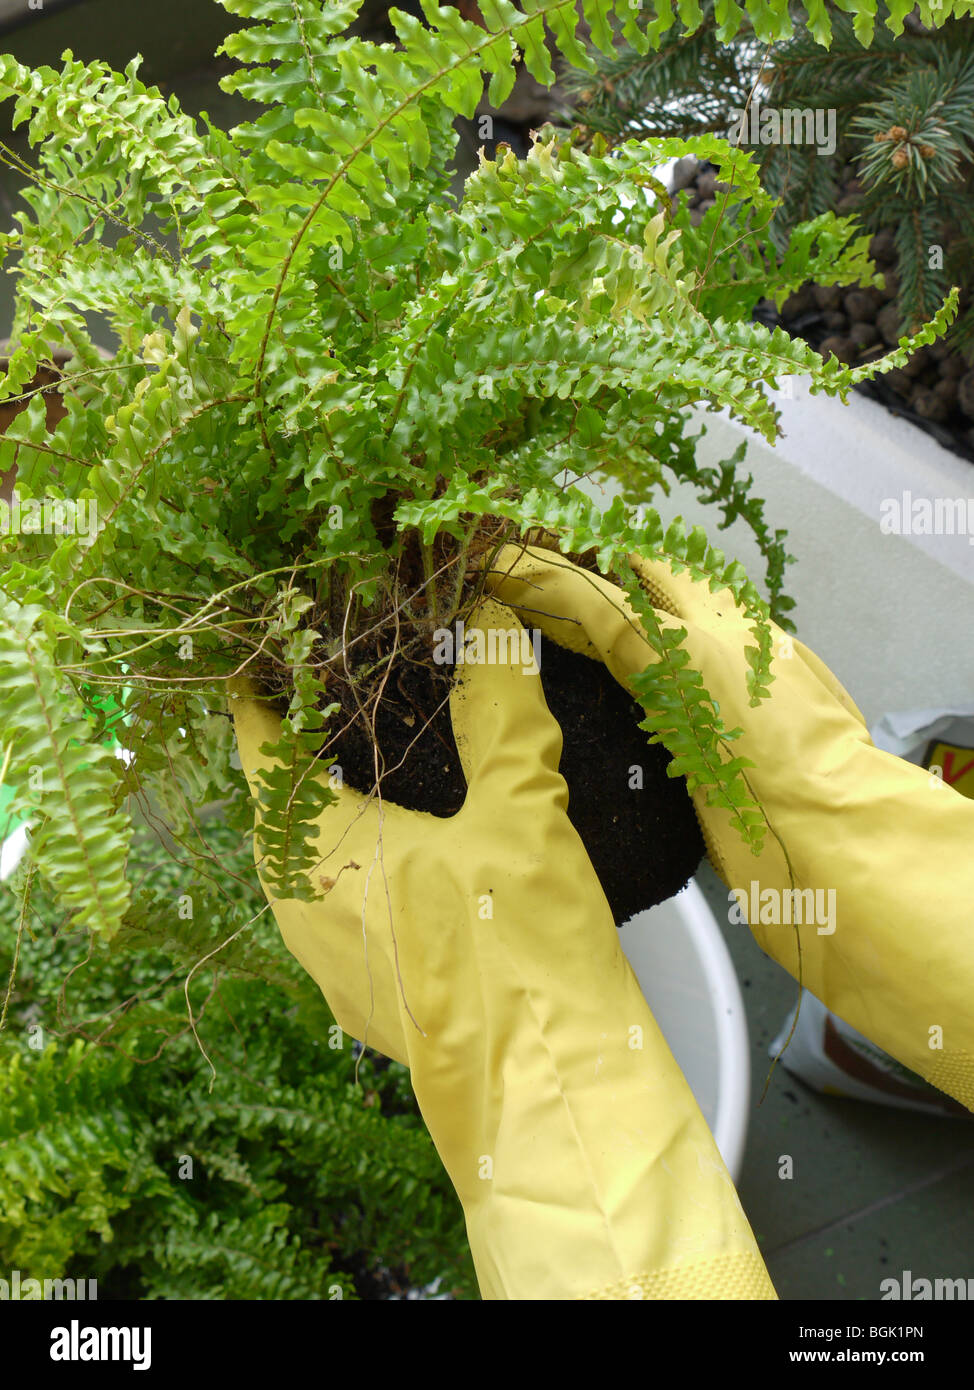 Closeup of gardener's hands wearing rubber gloves bedding out potted fern plant Stock Photo